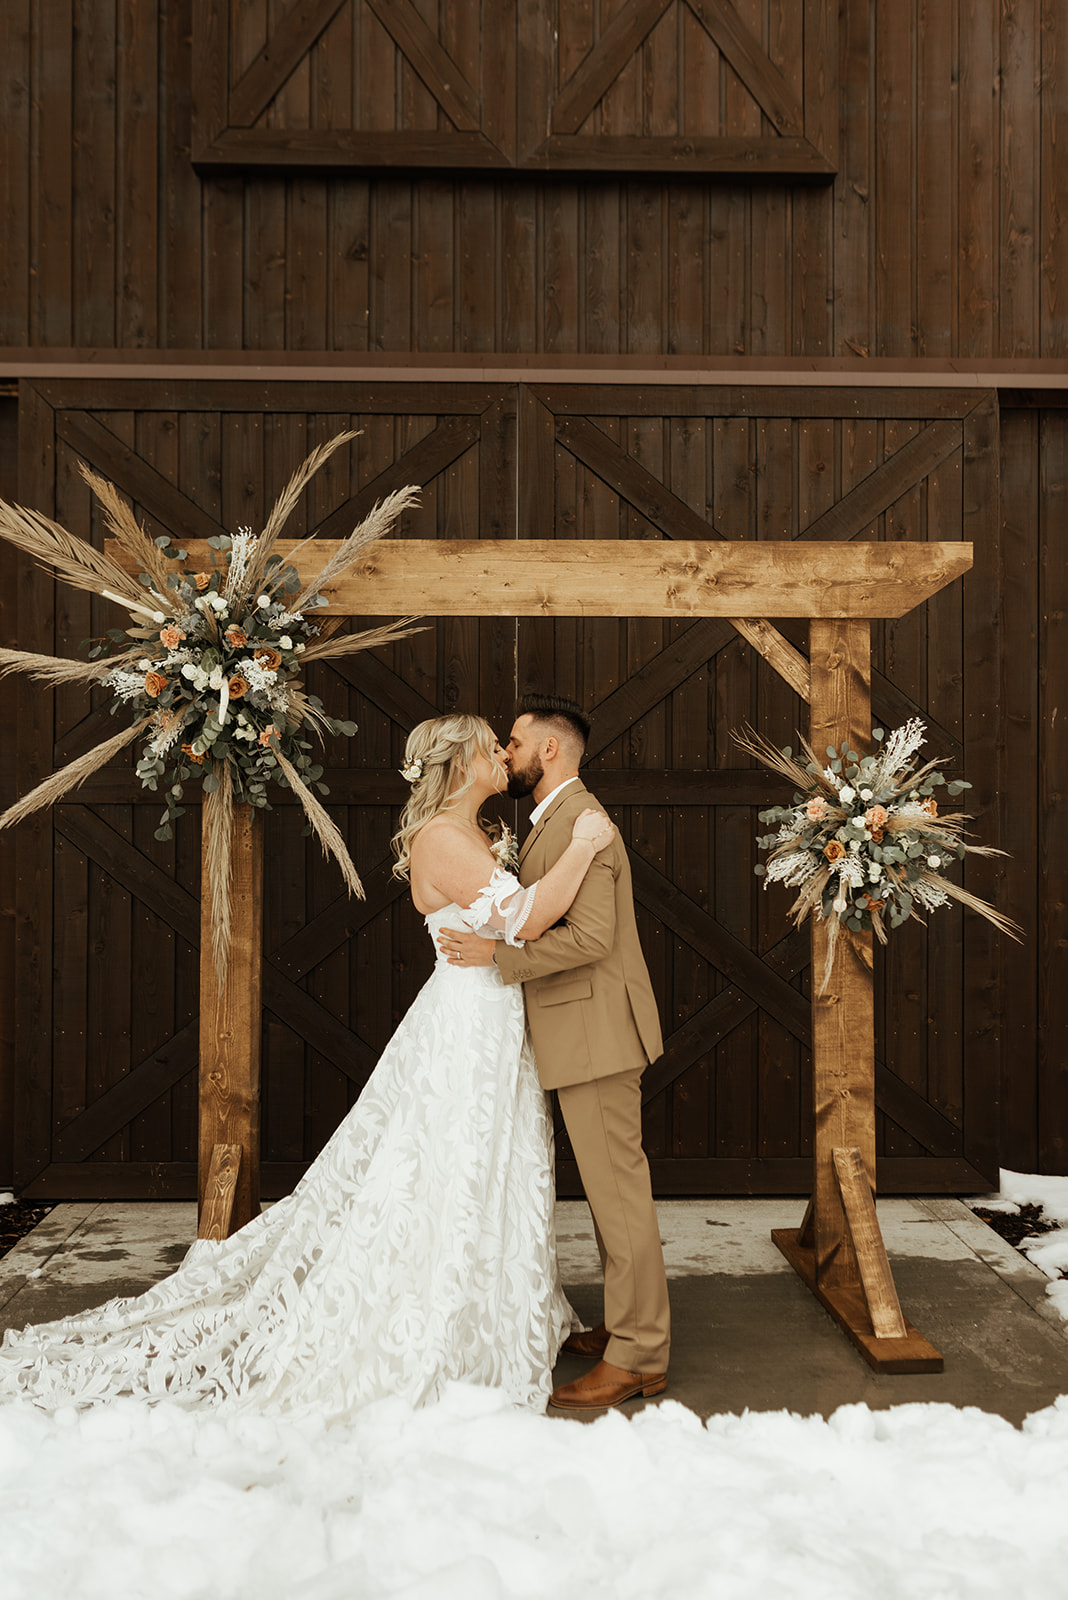 wedding archway with dried florals, wedding floral inspiration, bridal portraits